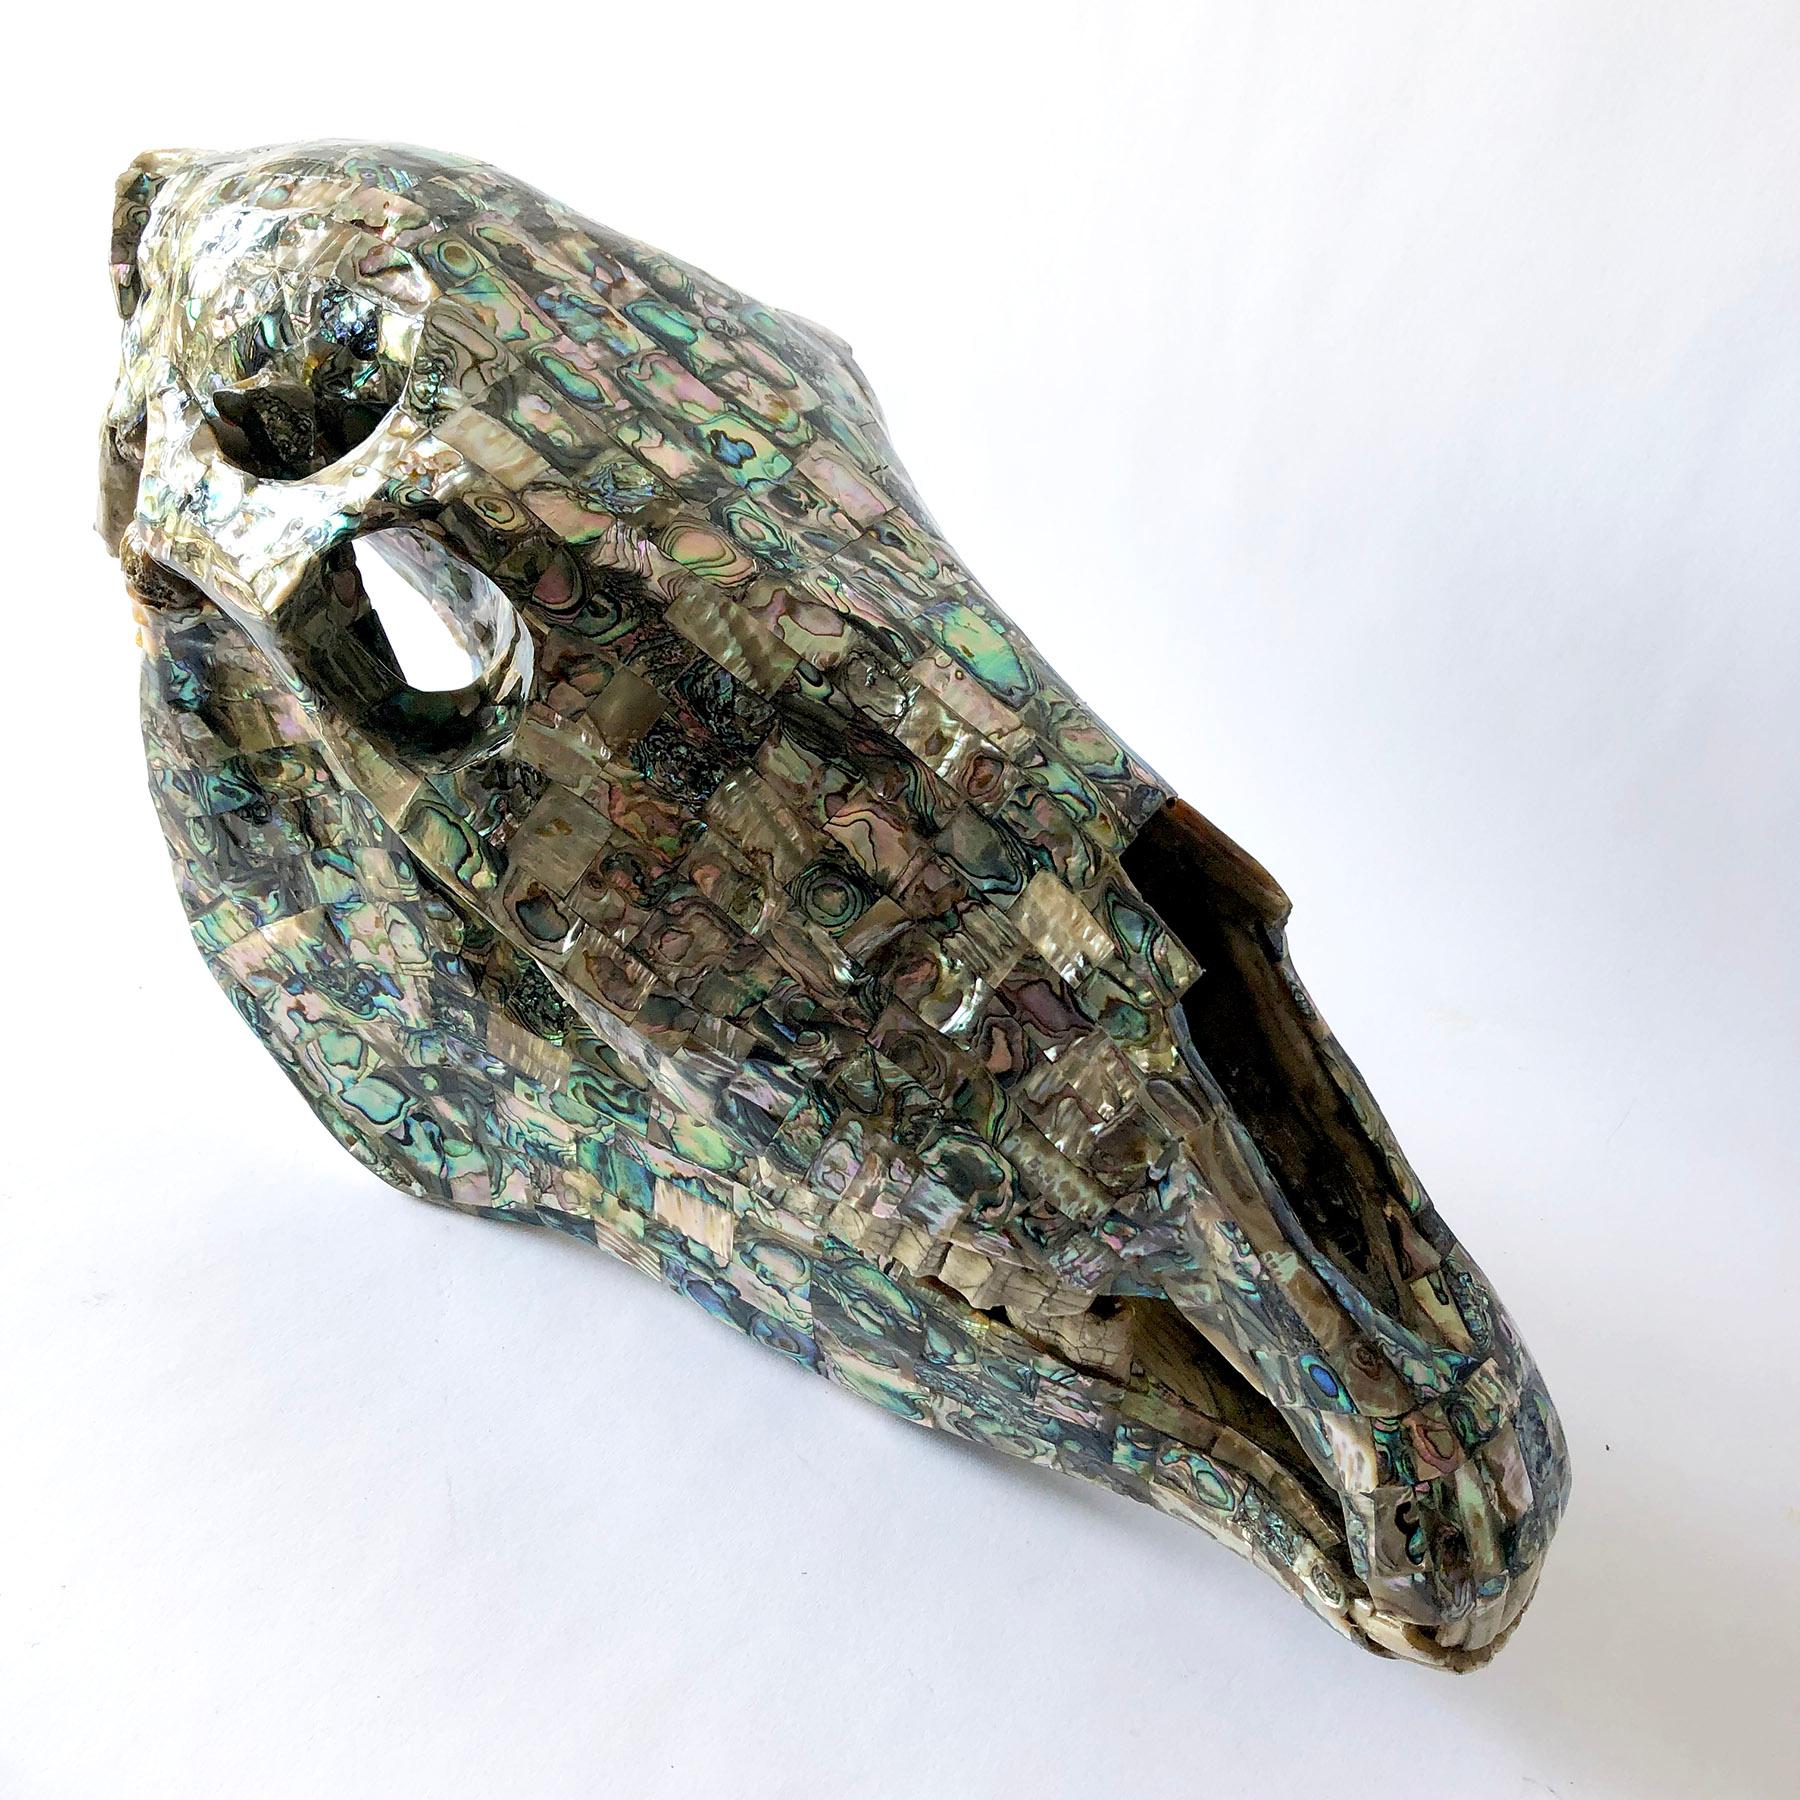 A rare abalone tiled horse skull sculpture with articulating jaw created by Los Castillo of Taxco, Mexico. Sculpture measures 11